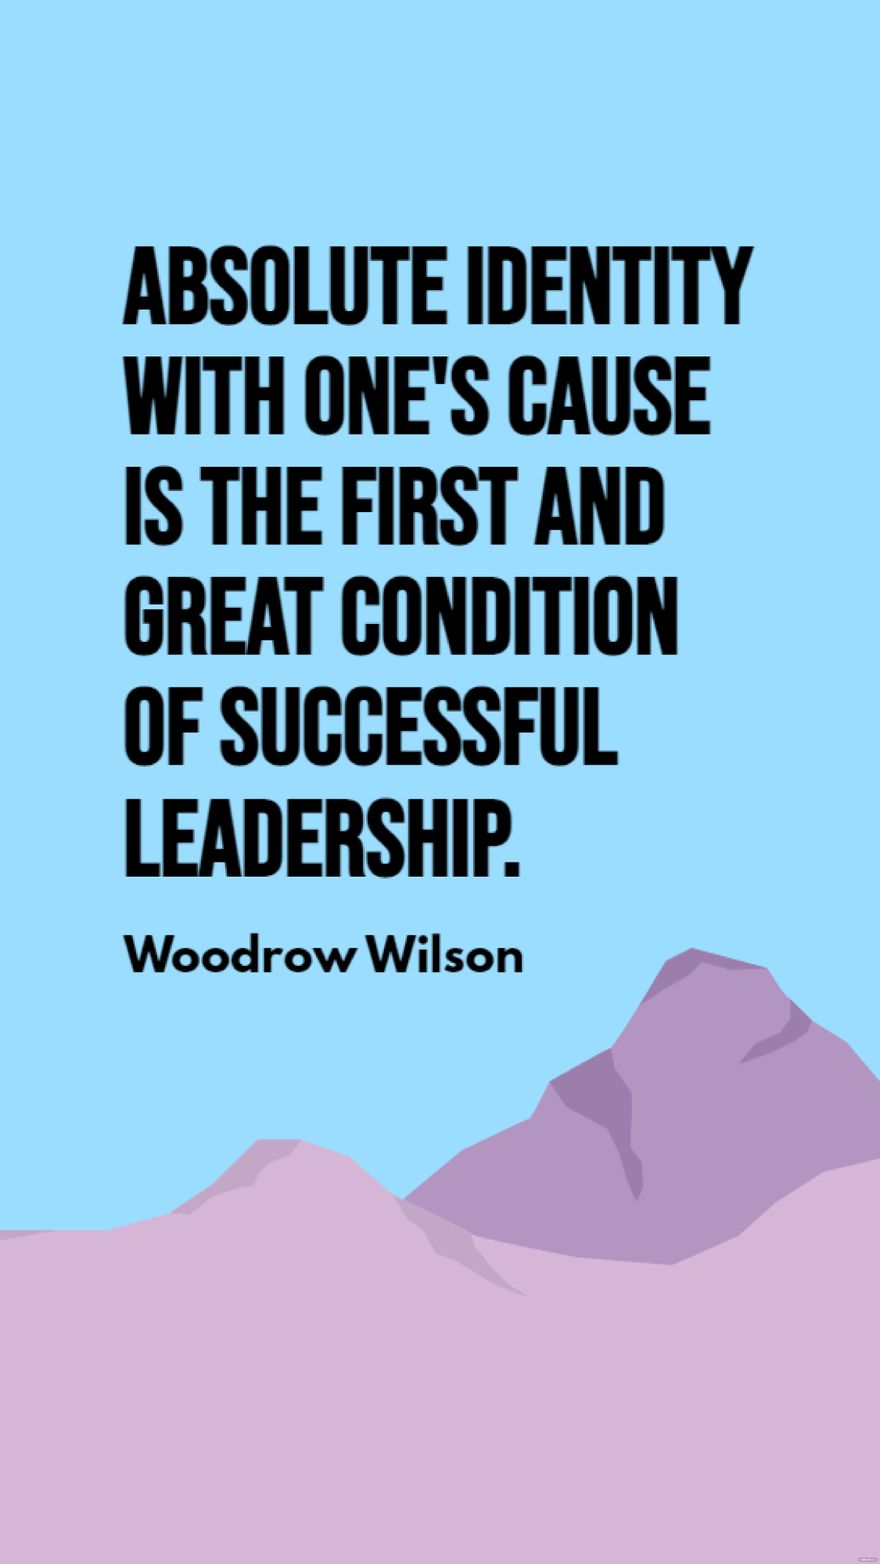 Free Woodrow Wilson - Absolute identity with one's cause is the first and great condition of successful leadership.